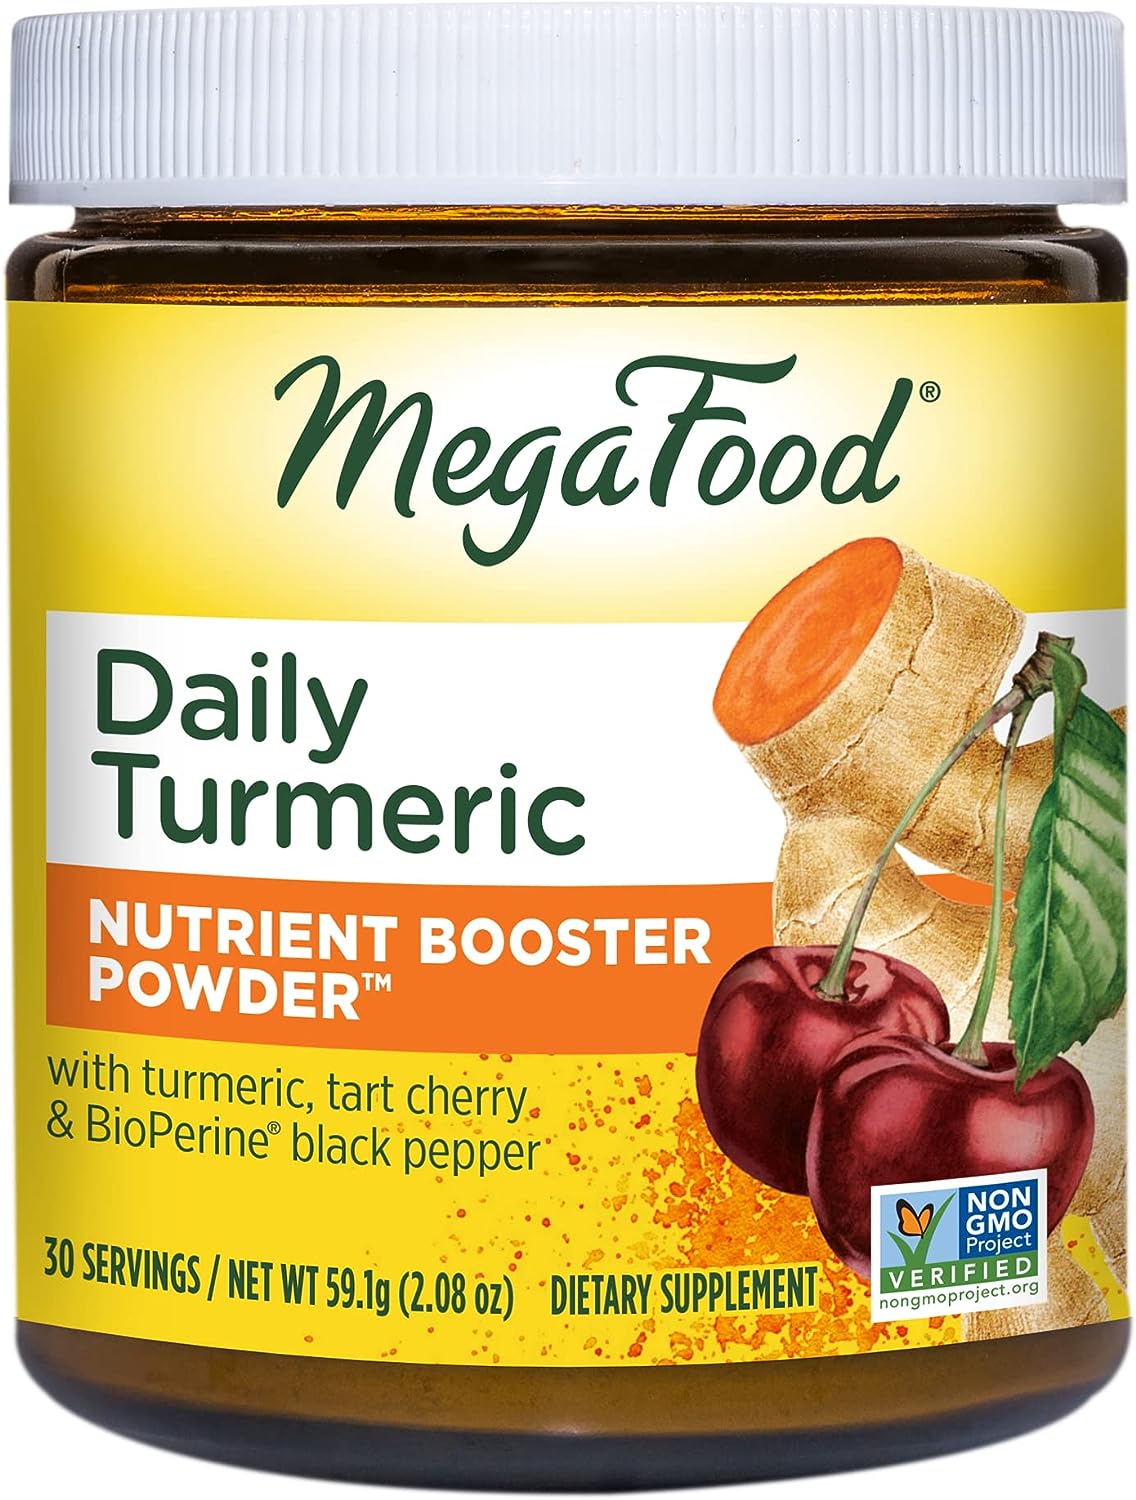 MegaFood Daily Turmeric Nutrient Booster Powder - Turmeric Supplement